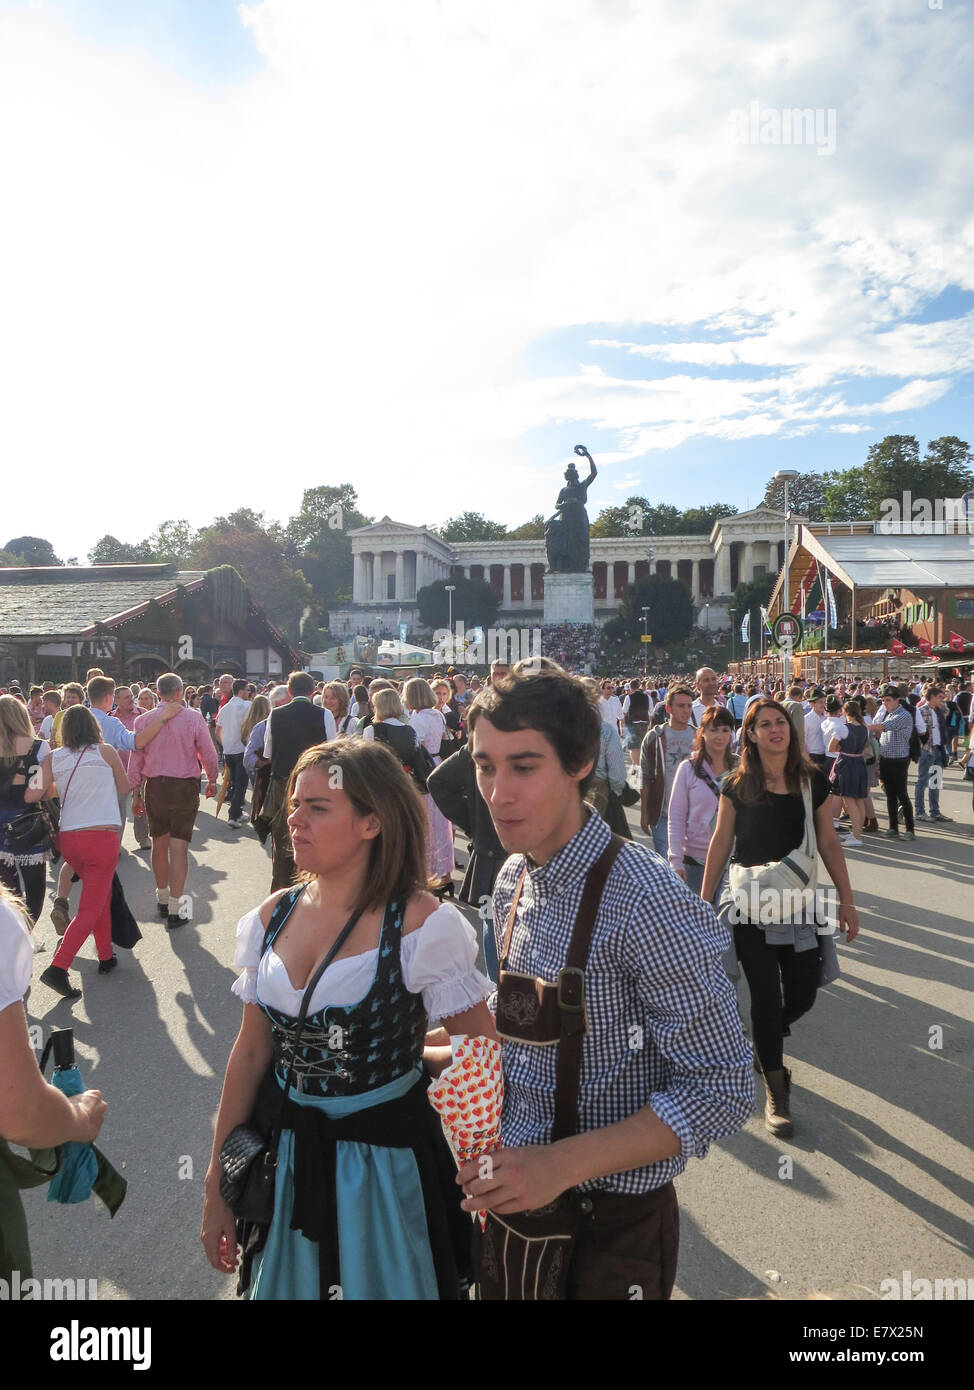 Scene from the annual funfair Oktoberfest - also known as Wiesn - on 20 September 2014 in Munich - Bavaria - Germany. Stock Photo